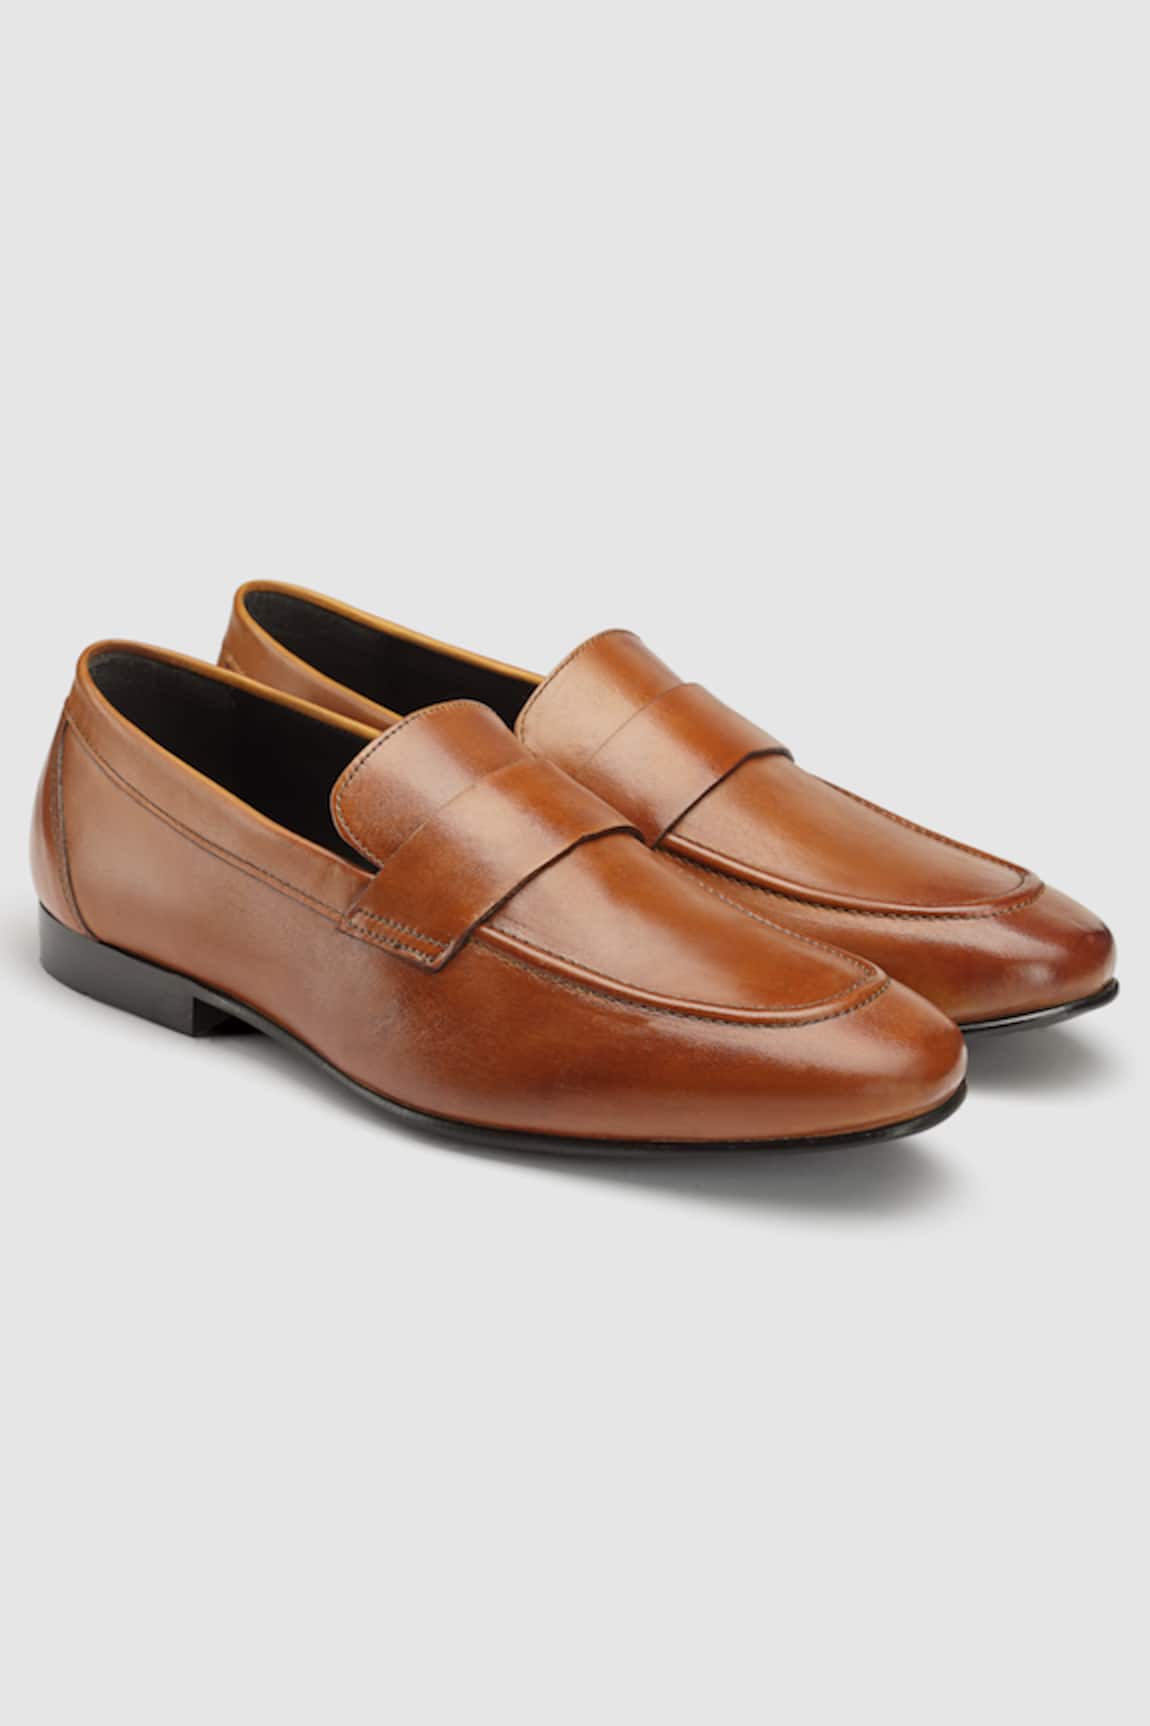 Hats Off Accessories Leather Solid Slip On Shoes